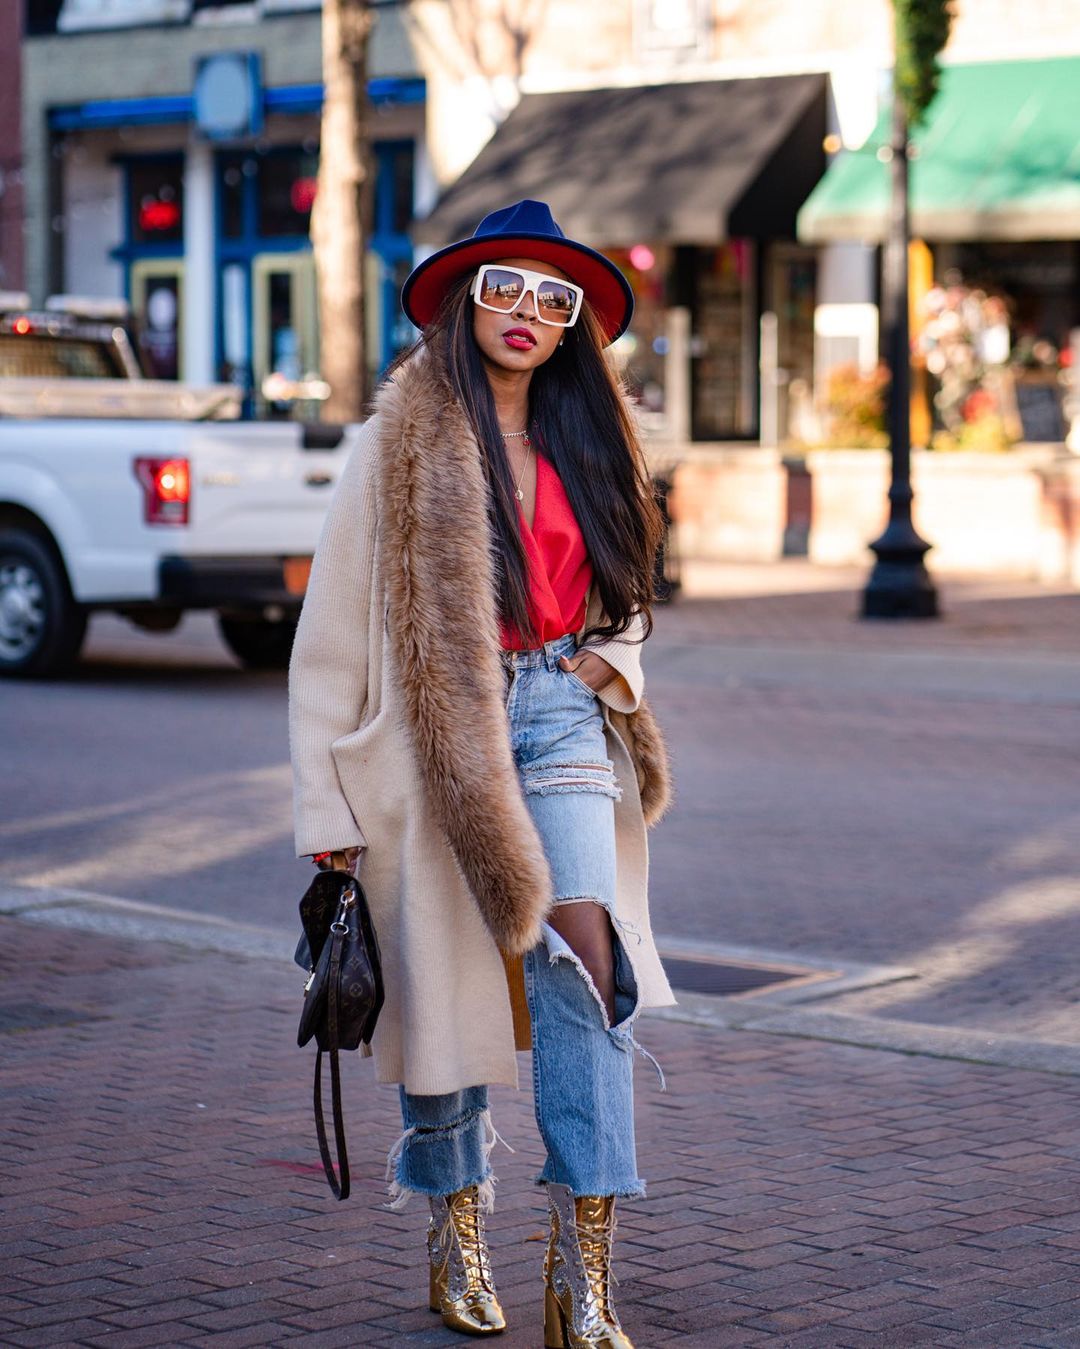 Outfits with Ripped Jeans: 23 Ways to Wear Distressed Denim